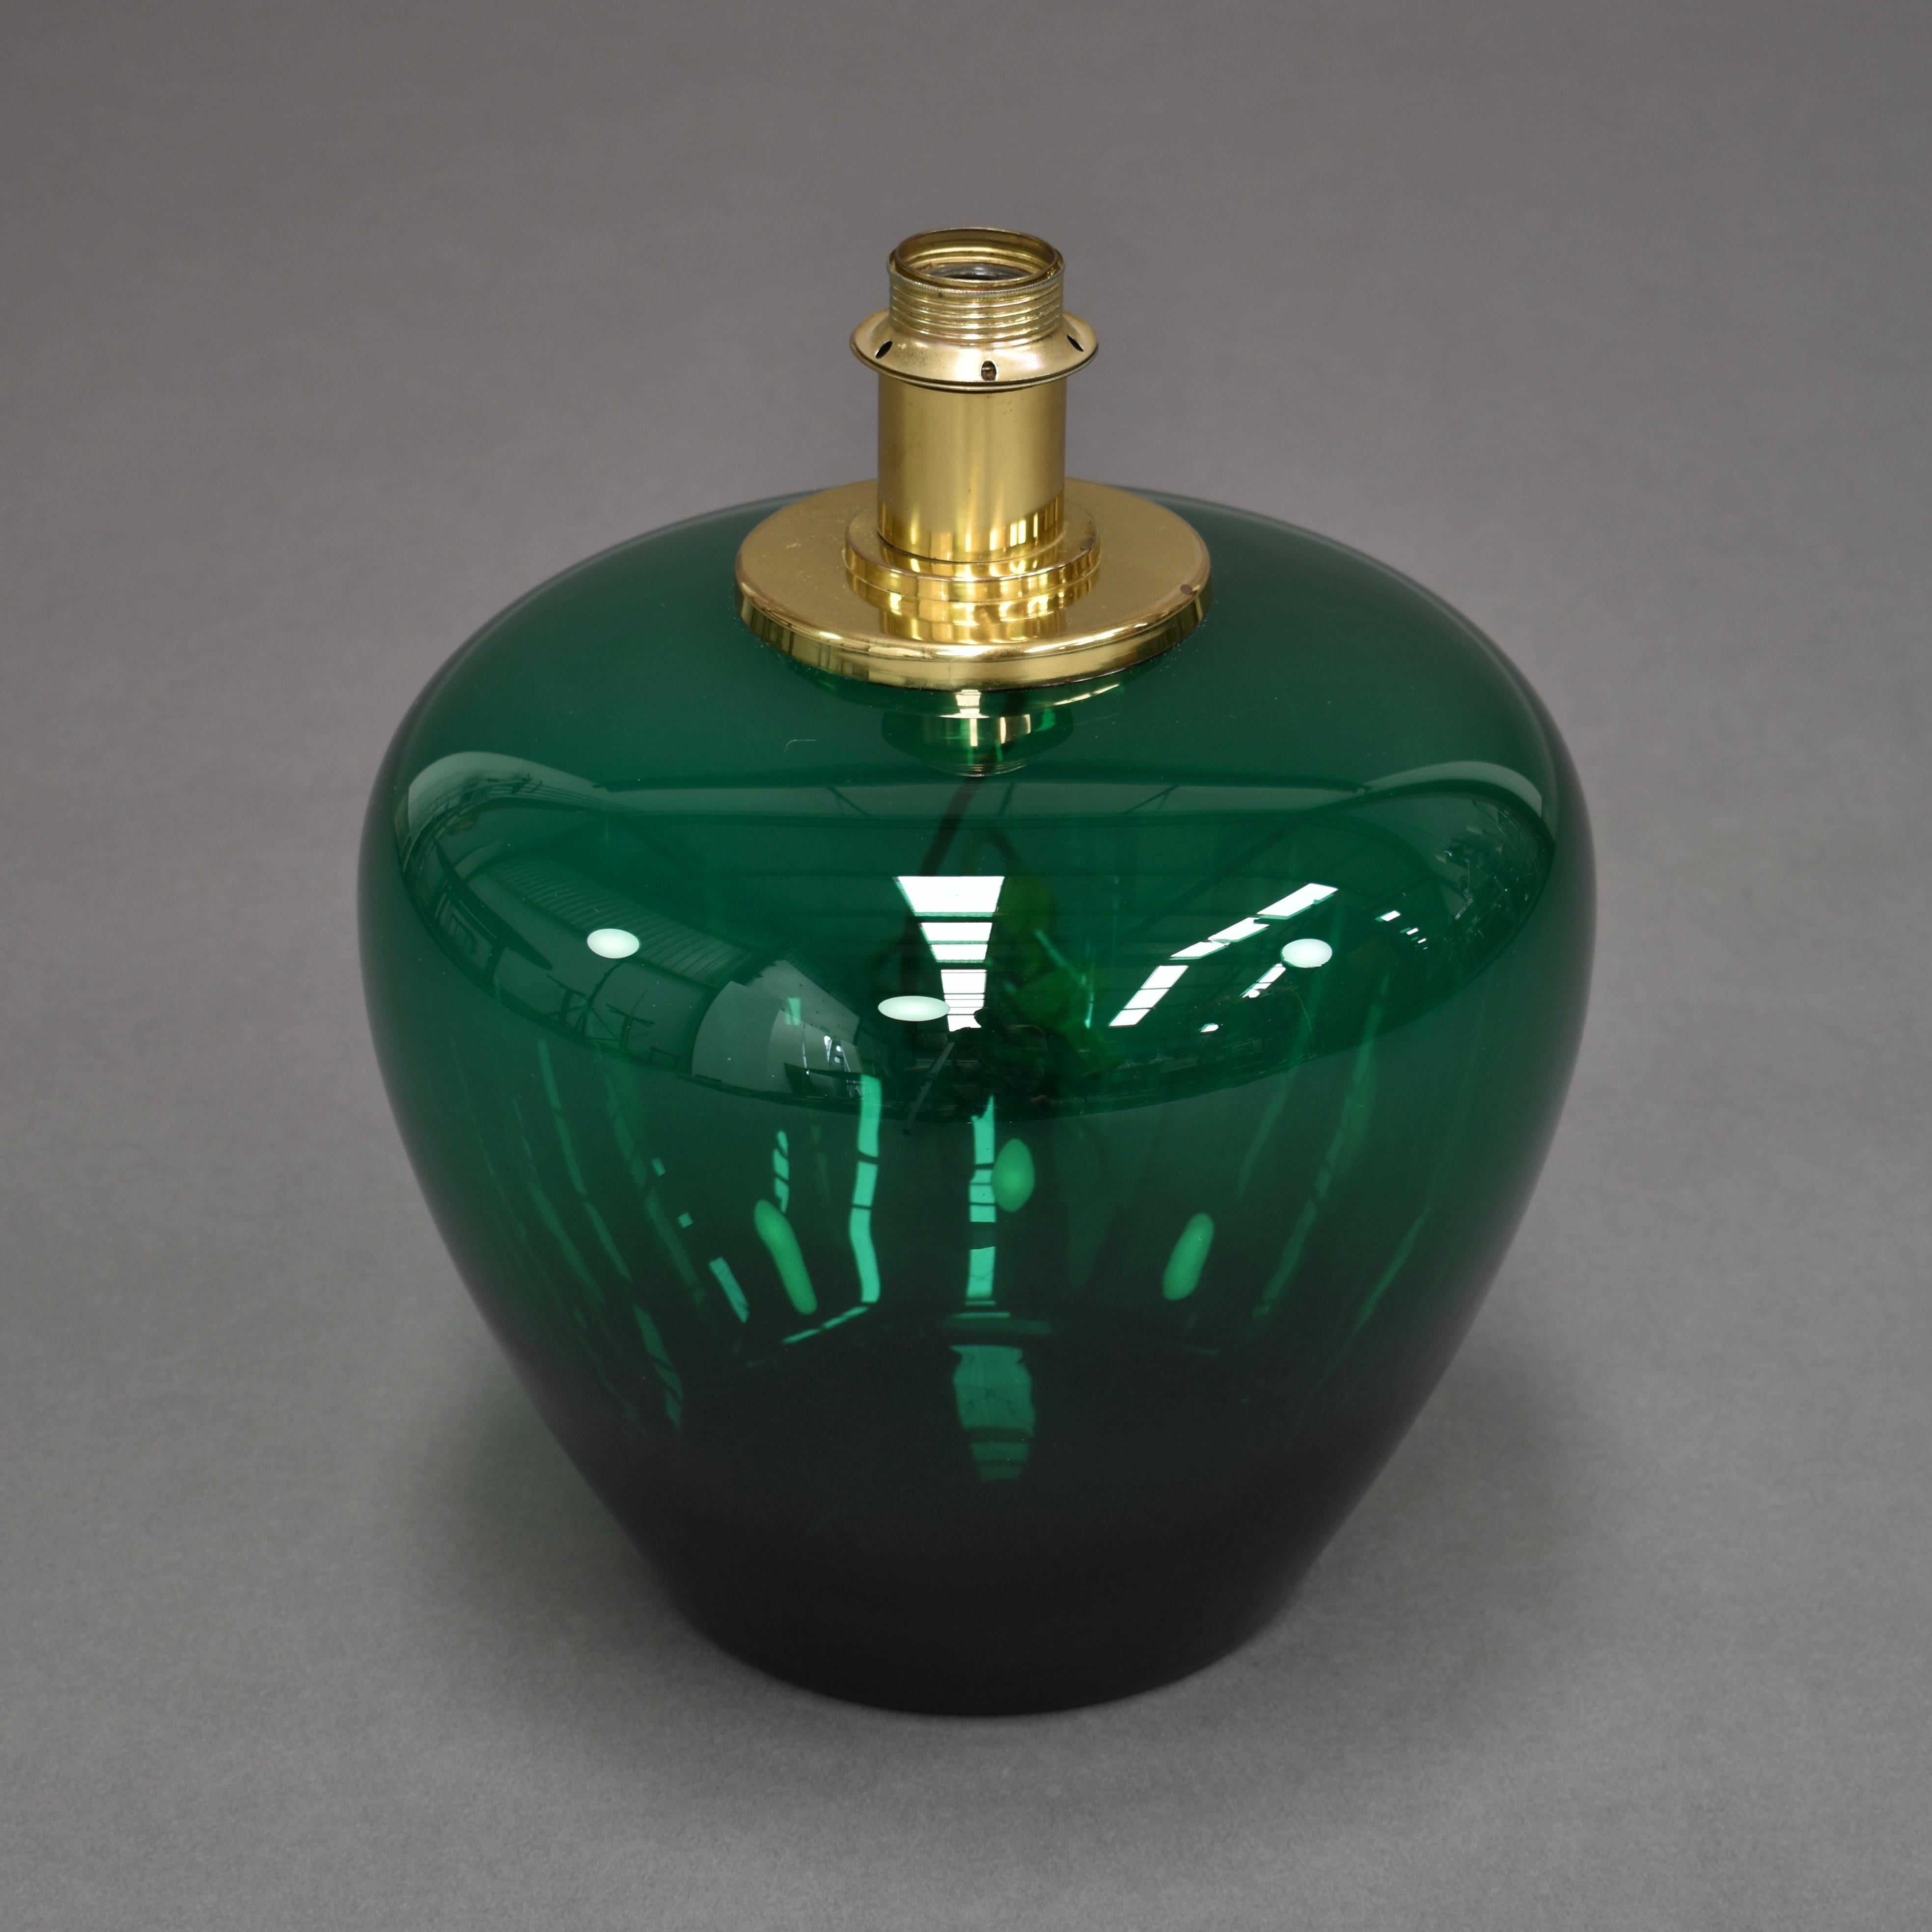 Beautiful seventies Italian table lamp in Emerald green glass and brass.

Manufacturer: Unknown

Designer: Unknown

Country: Italy

Model: table lamp

Material: Emerald glass / brass

Design period: 1970s

Date of manufacturing: circa